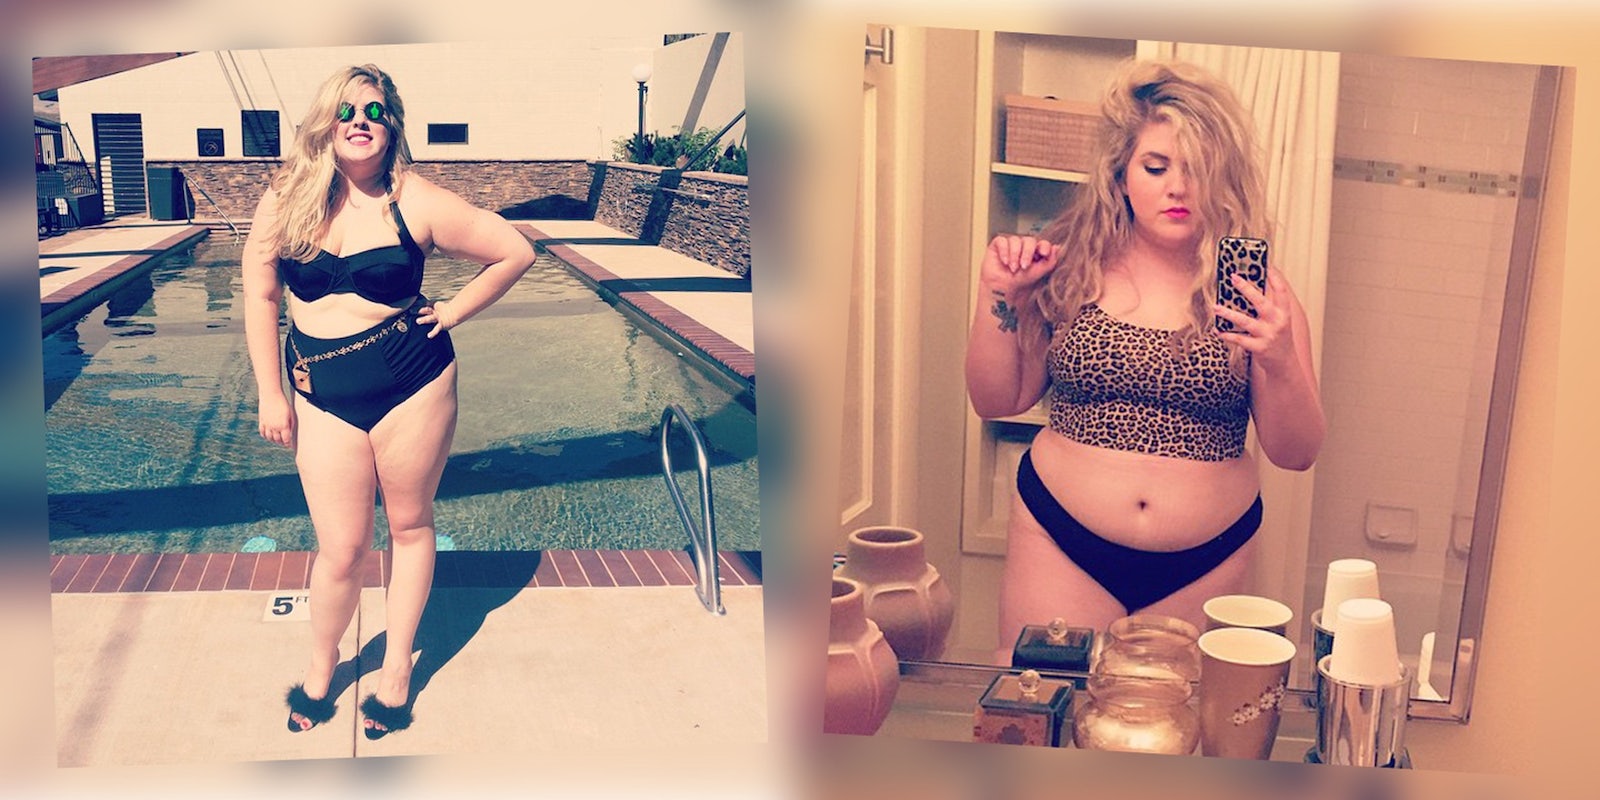 Plus-size gals call out Oprah's magazine for fat-shaming with